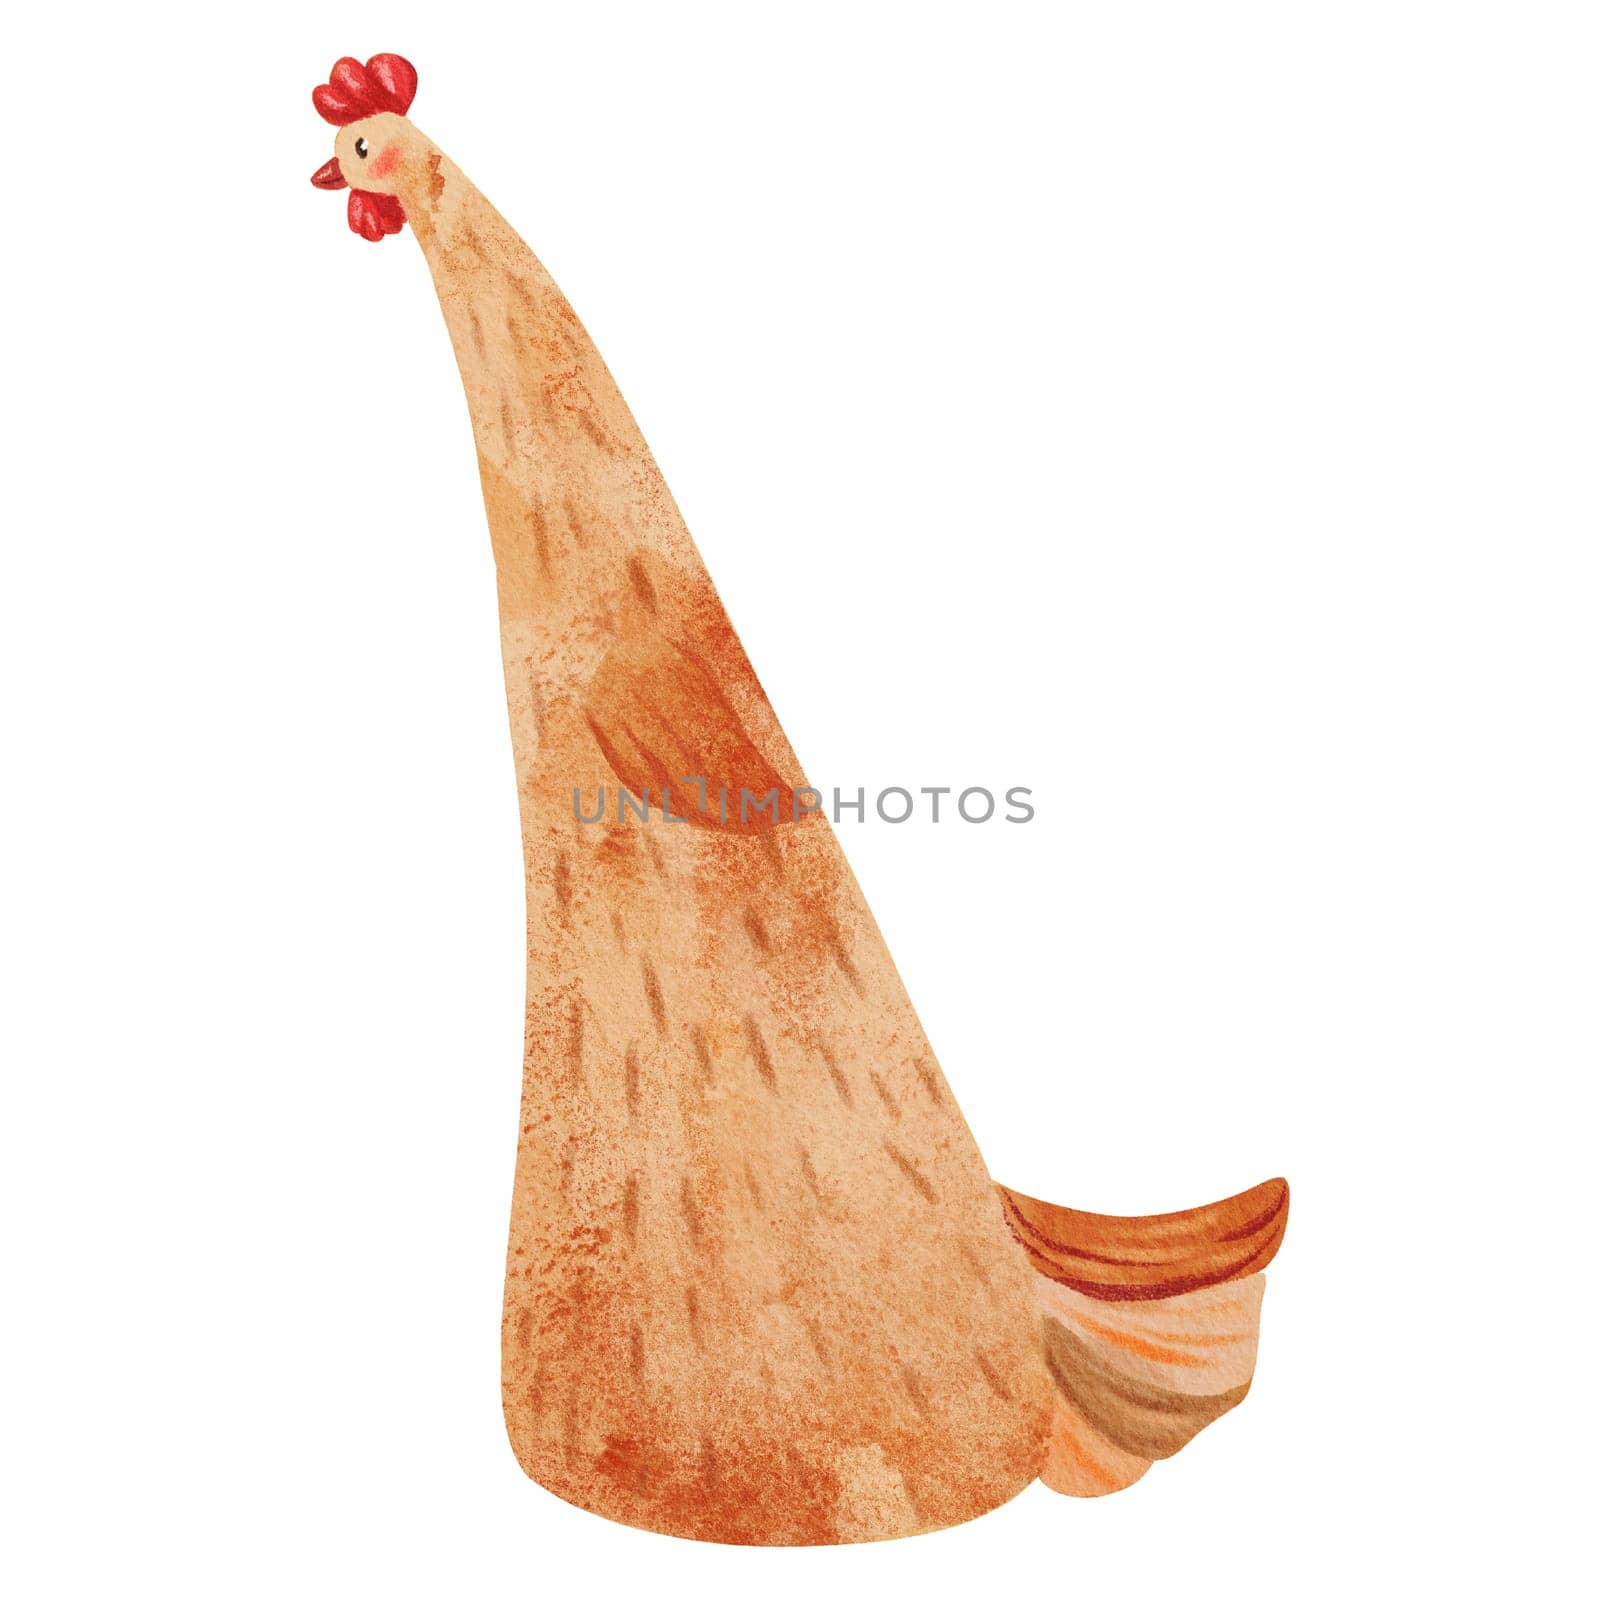 Watercolor illustration in a cartoon style. a speckled chicken. the whimsical charm of a feathered friend. playful and lighthearted atmosphere, perfect for children's designs, cards, and prints.